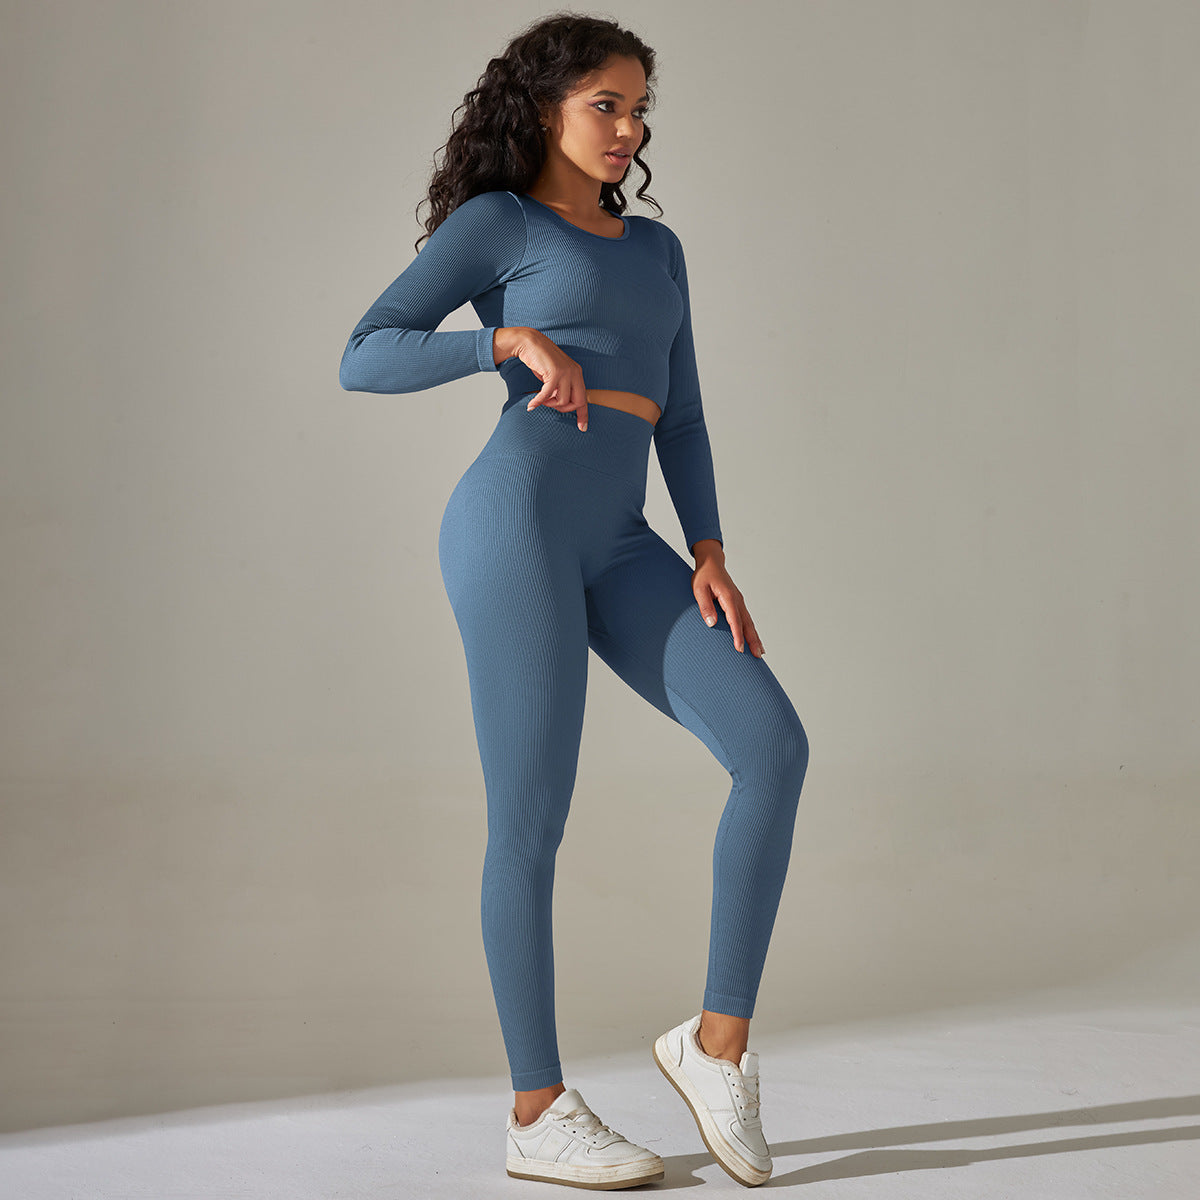 Seamless Solid Color Stripes Peach High Waist Tight Yoga Suit Sports Running Fitness Clothes Women